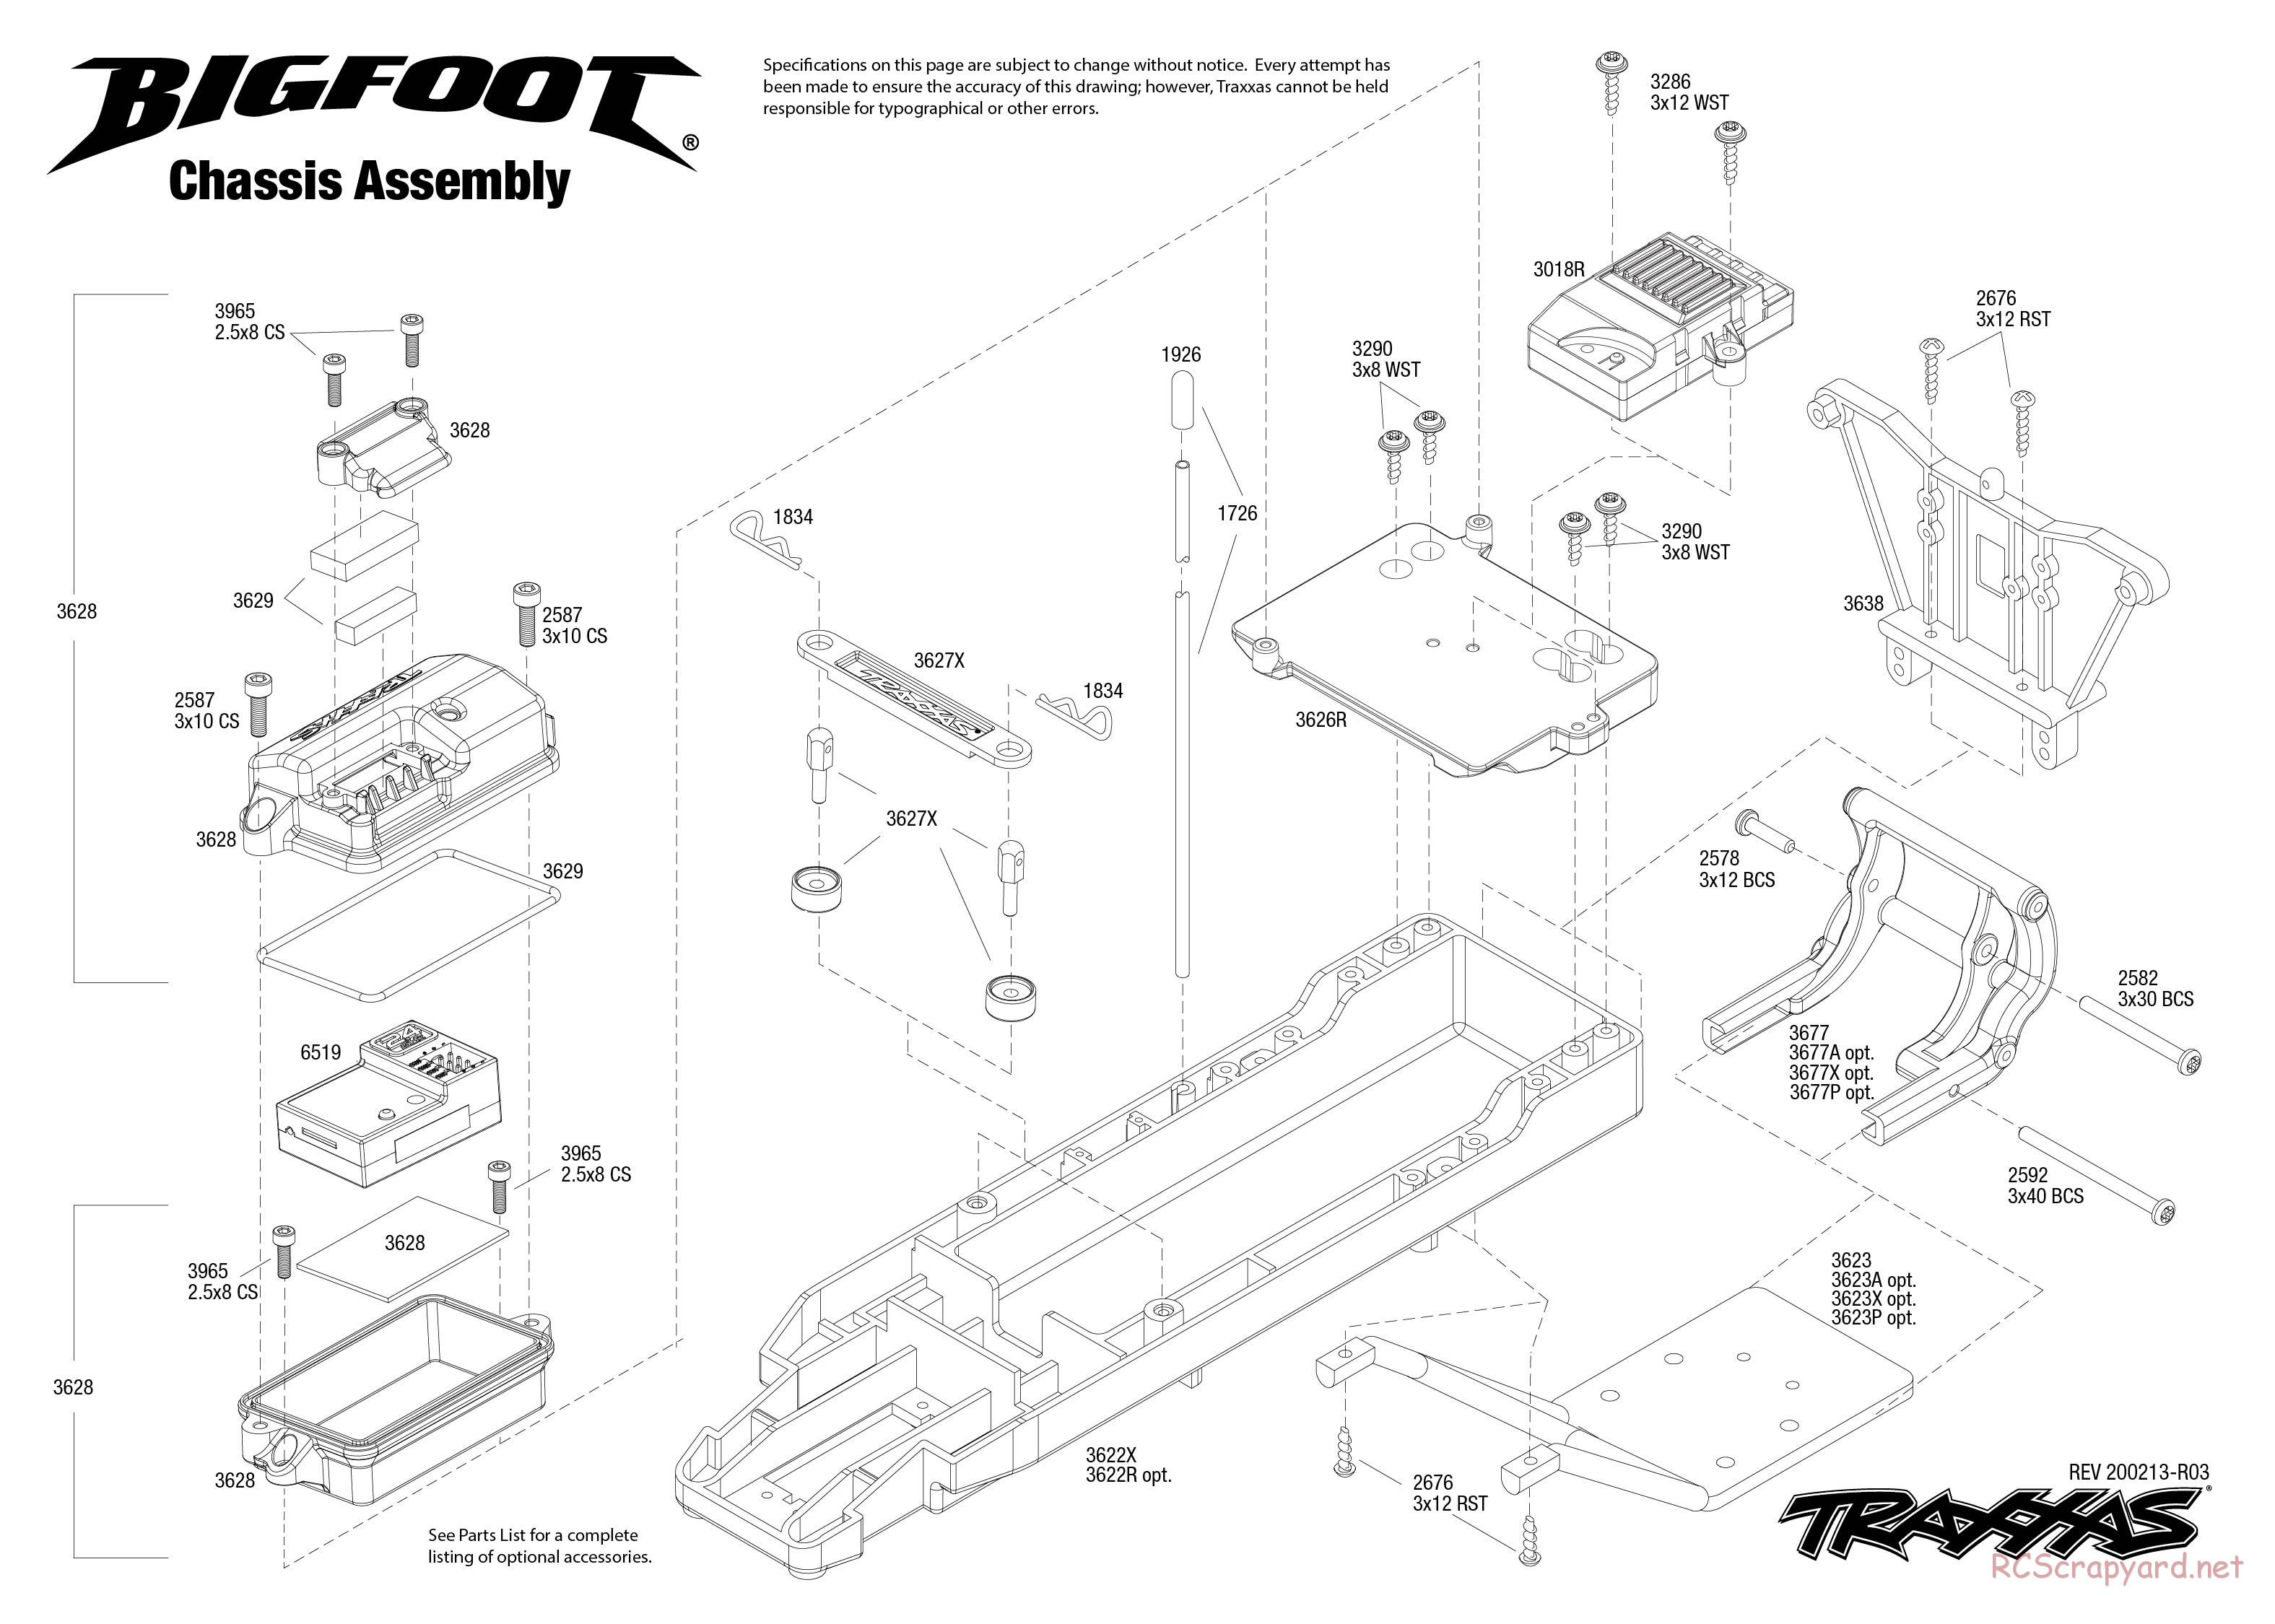 Traxxas - Bigfoot - Exploded Views - Page 1